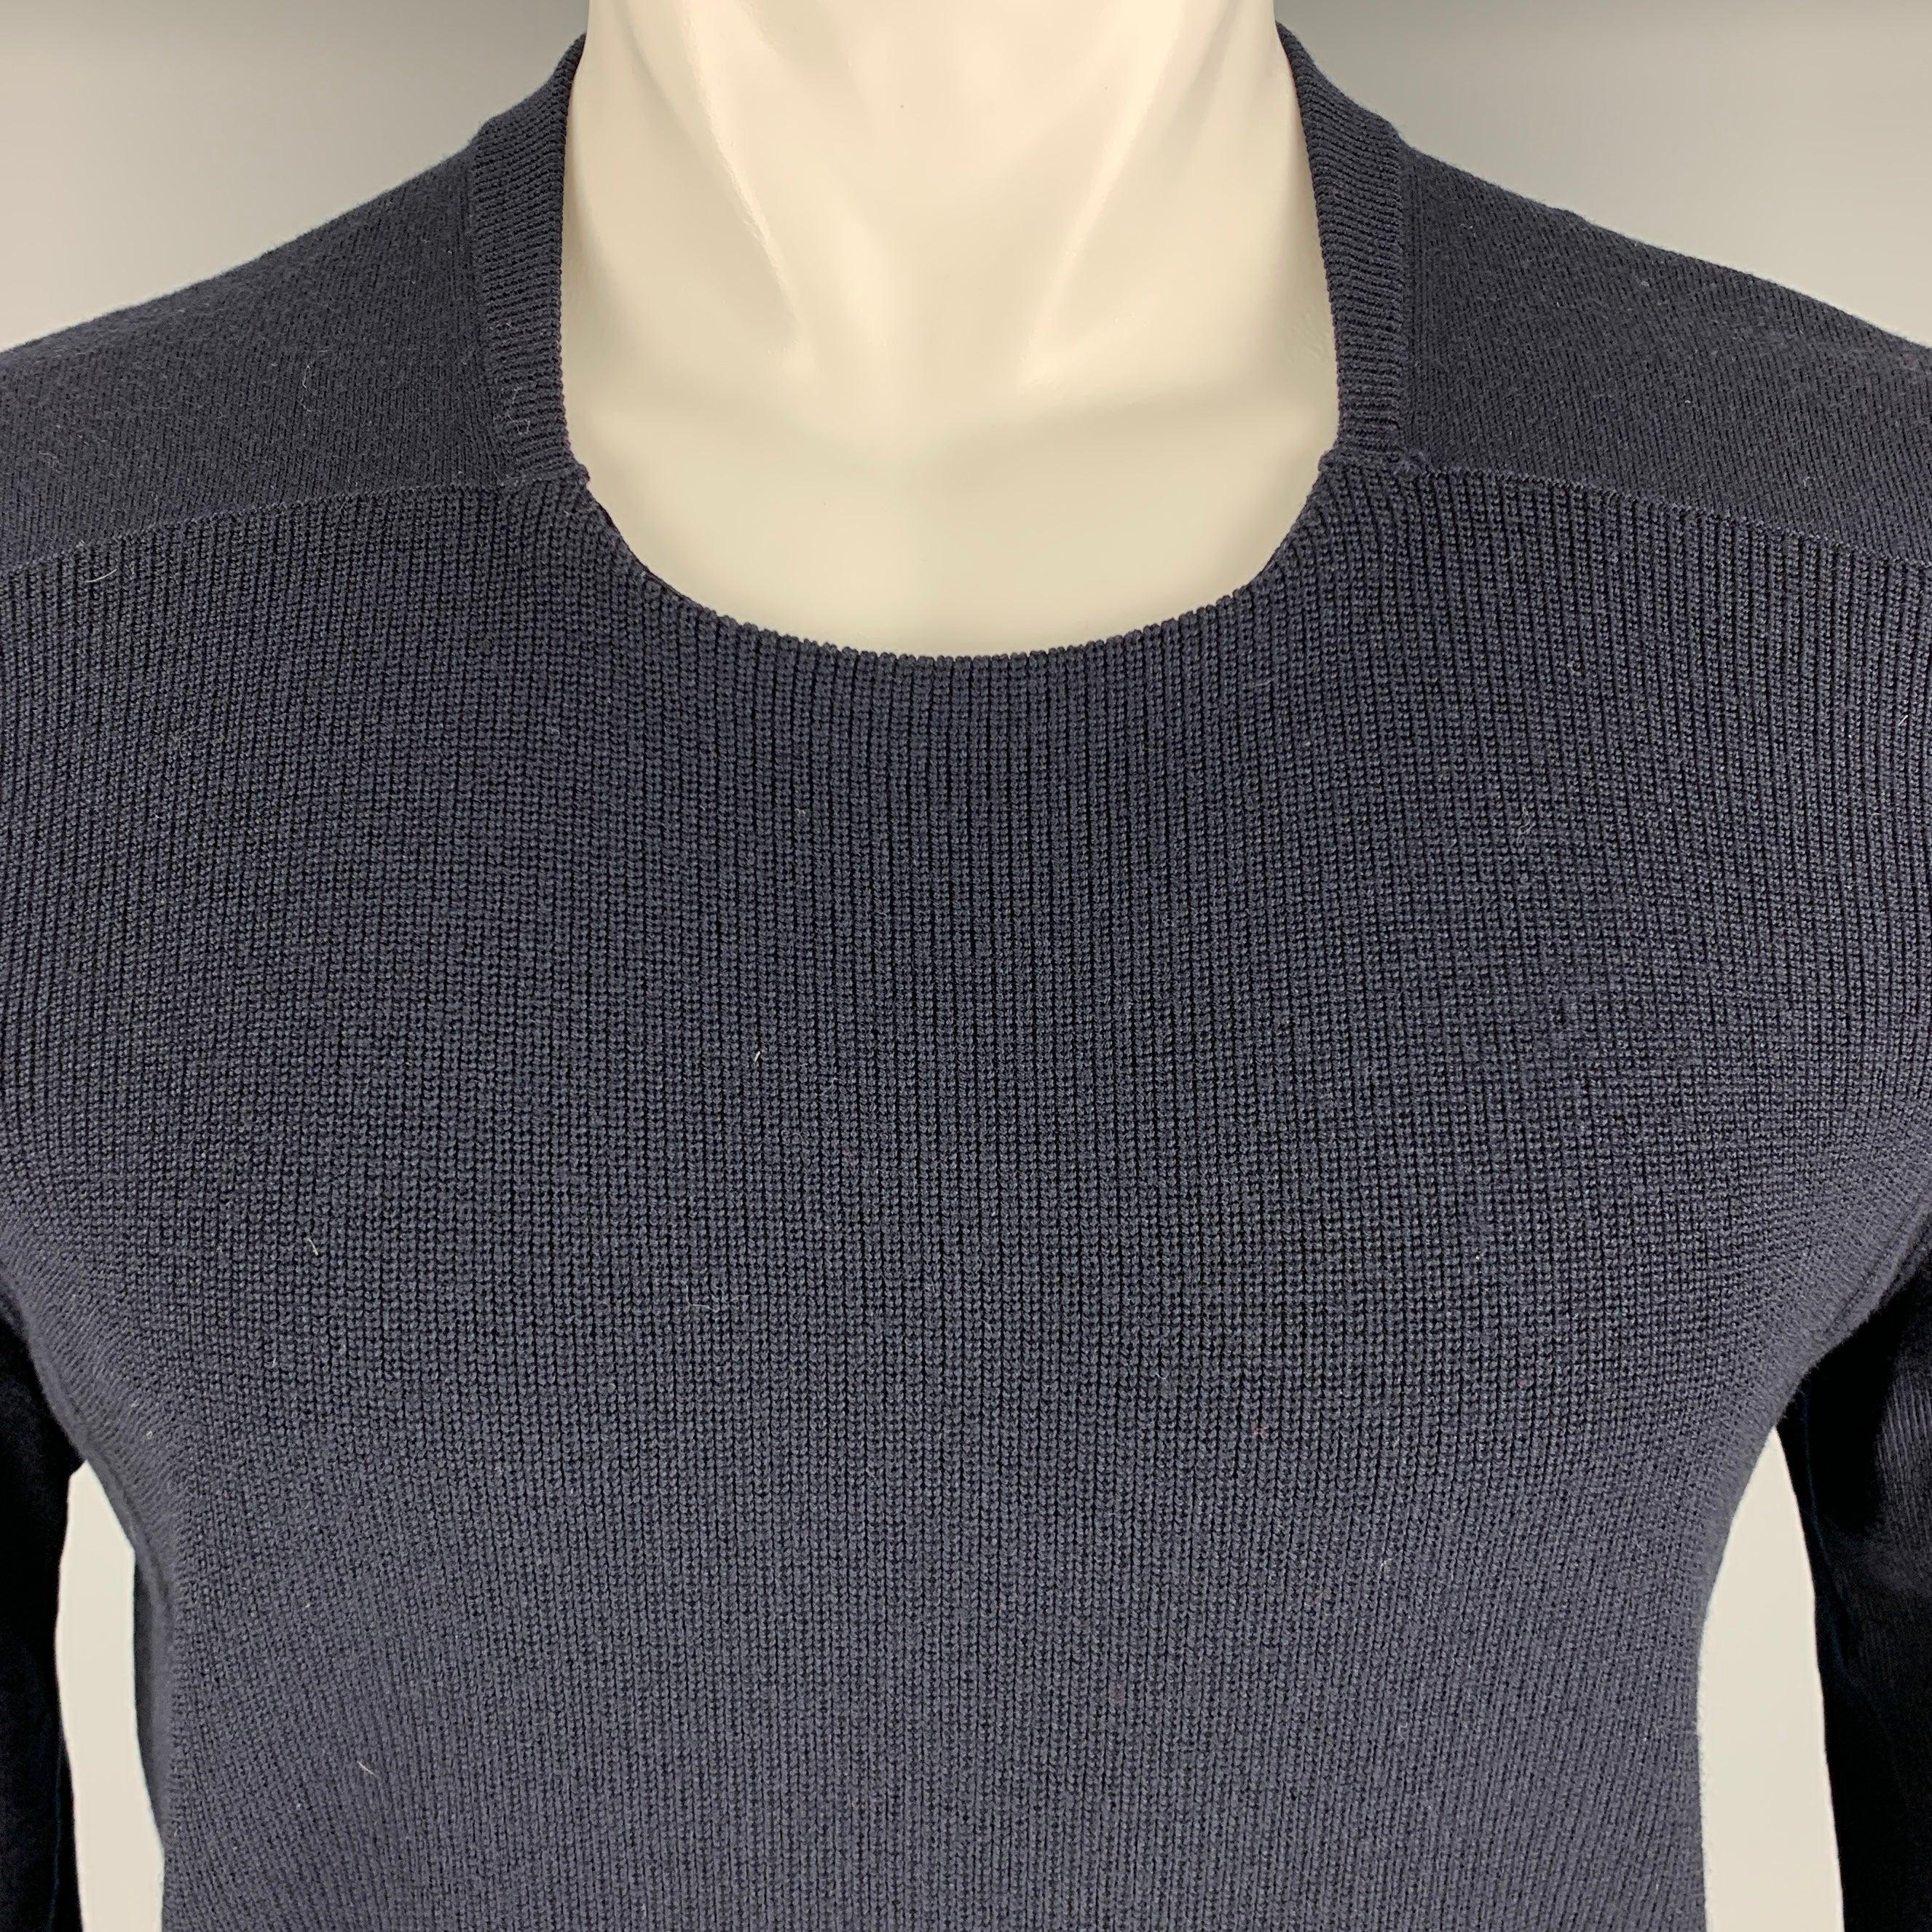 MAISON MARTIN MARGIELA pullover
in a navy wool knit featuring a waffle knit front, blouson sleeves, and scoop neck. Made in Romania.Excellent Pre-Owned Condition. 

Marked:   14 

Measurements: 
 
Shoulder: 16.5 inches Chest: 40 inches Sleeve: 27